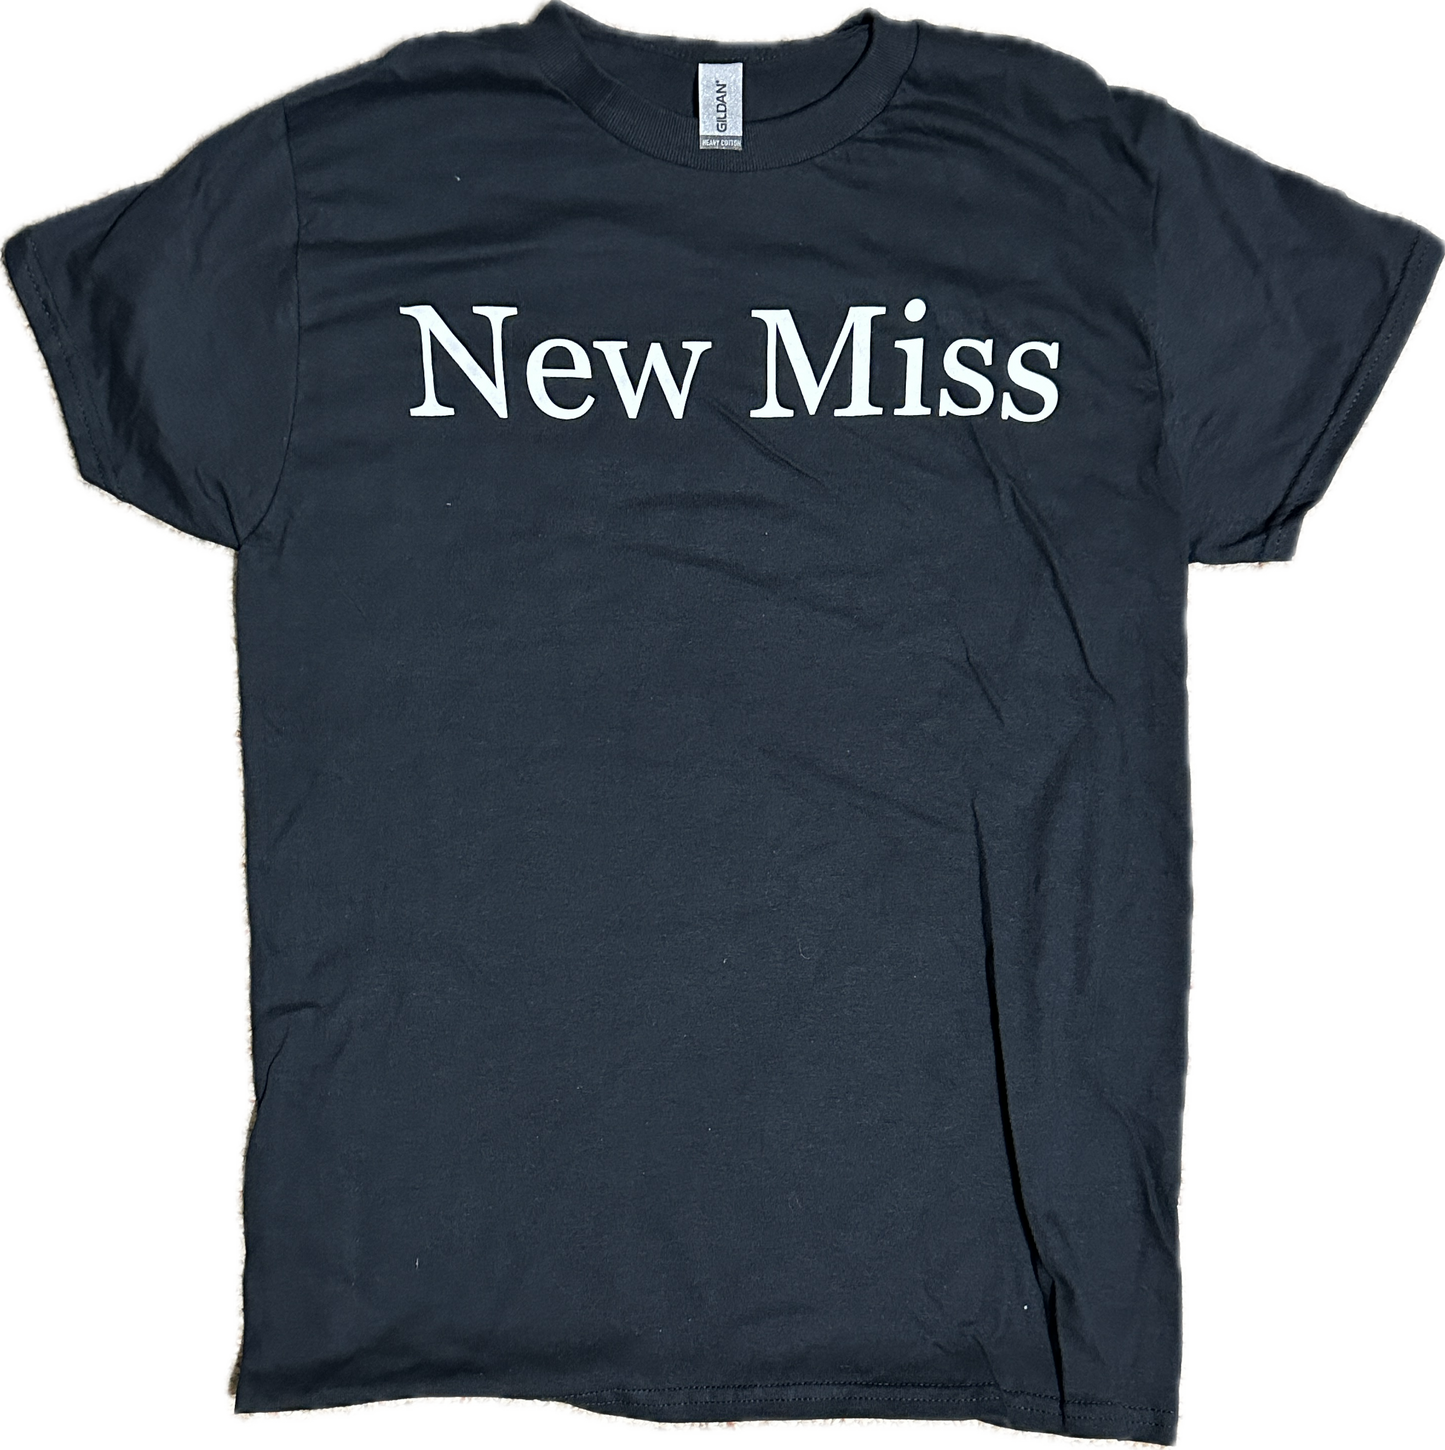 Limited Edition "New Miss" BLACK short-sleeve T-shirt (Fancy LETTERS)